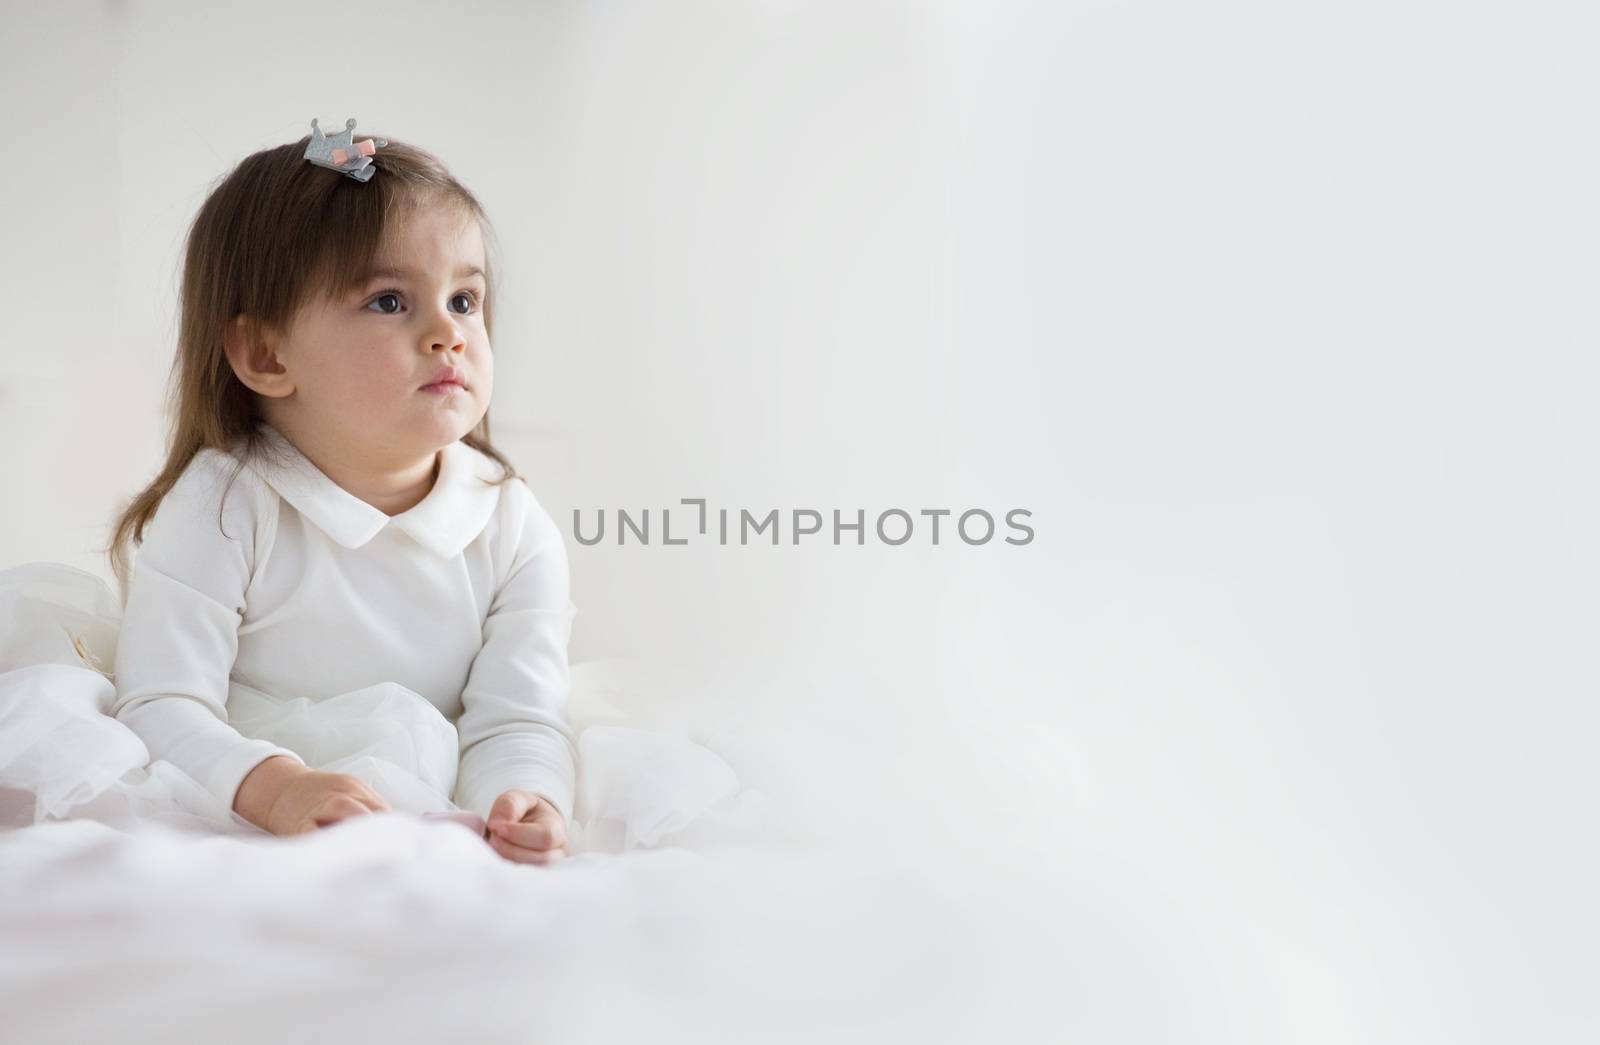 Pretty baby girl with brown hair in white dress over light background with copy space for text